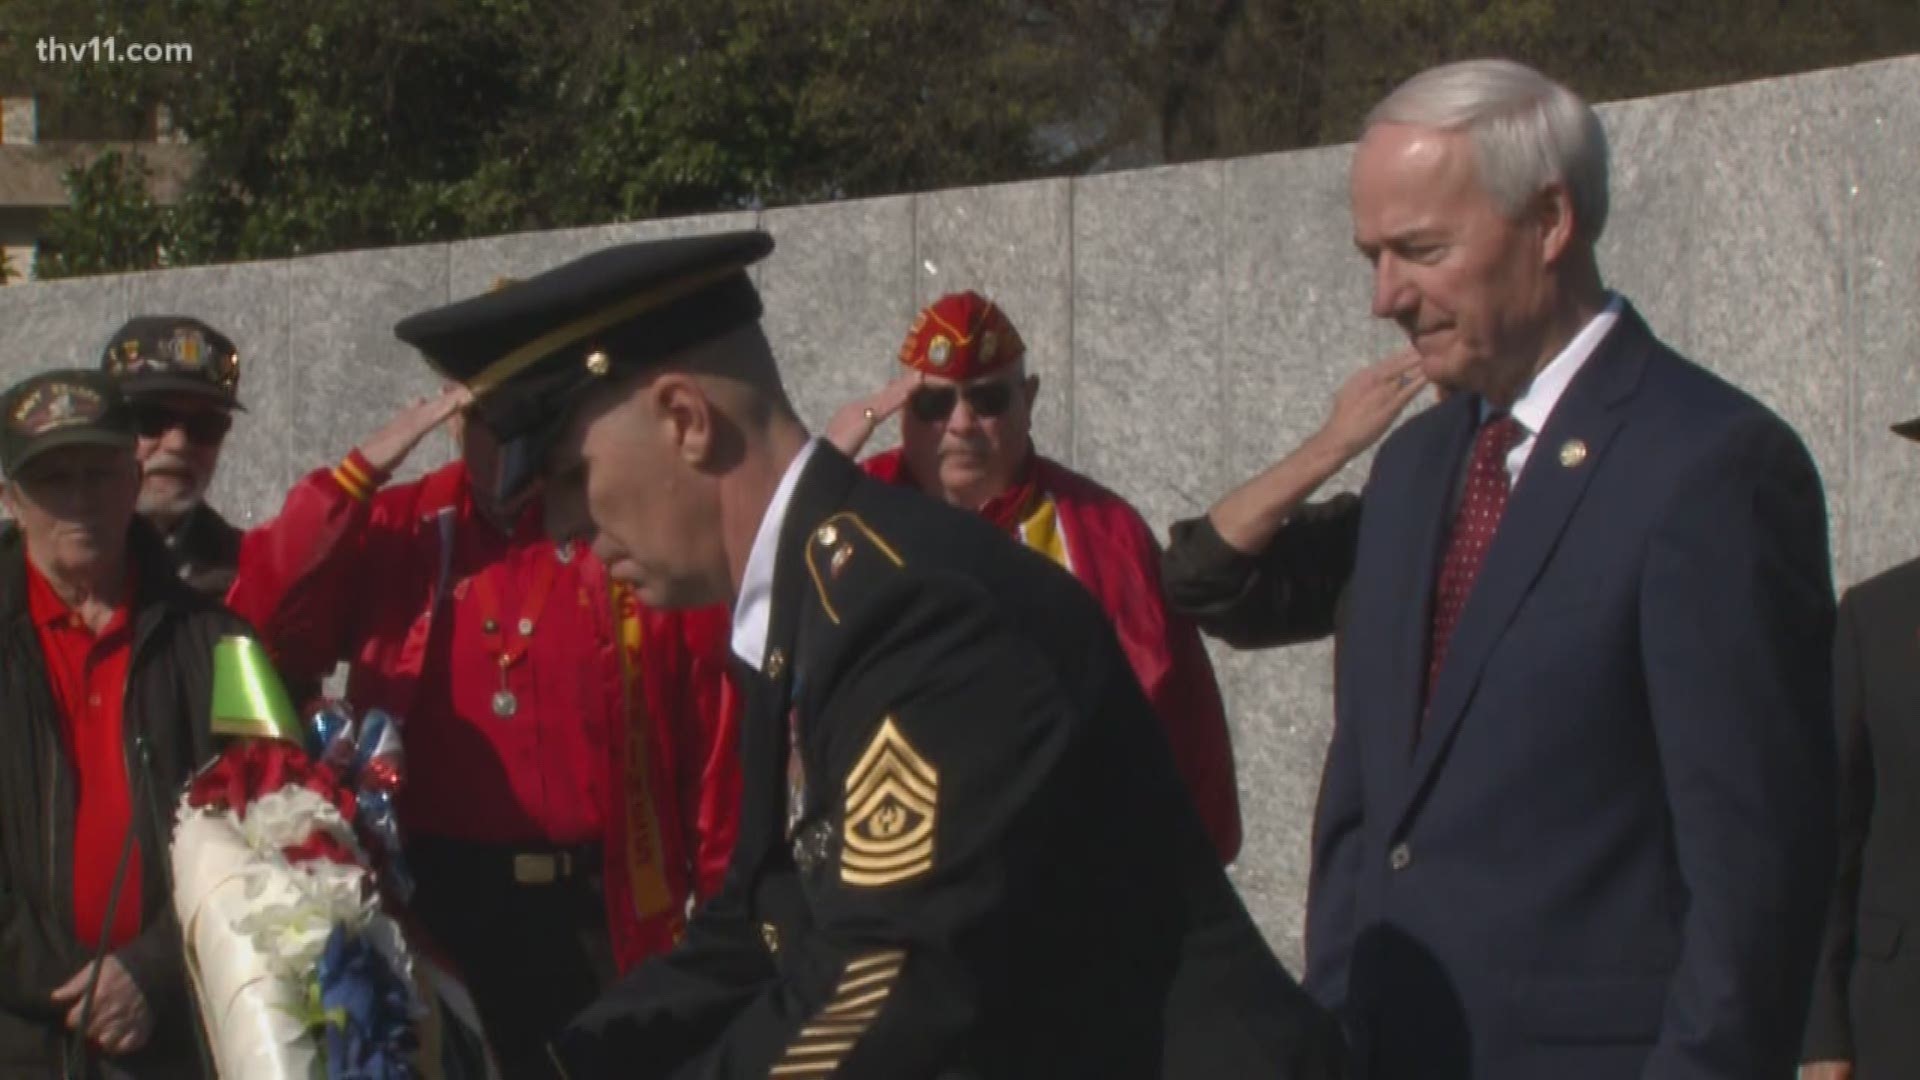 Governor Asa Hutchinson honors Arkansans who gave their lives in the Vietnam War by laying a wreath at the Vietnam Veterans Memorial.